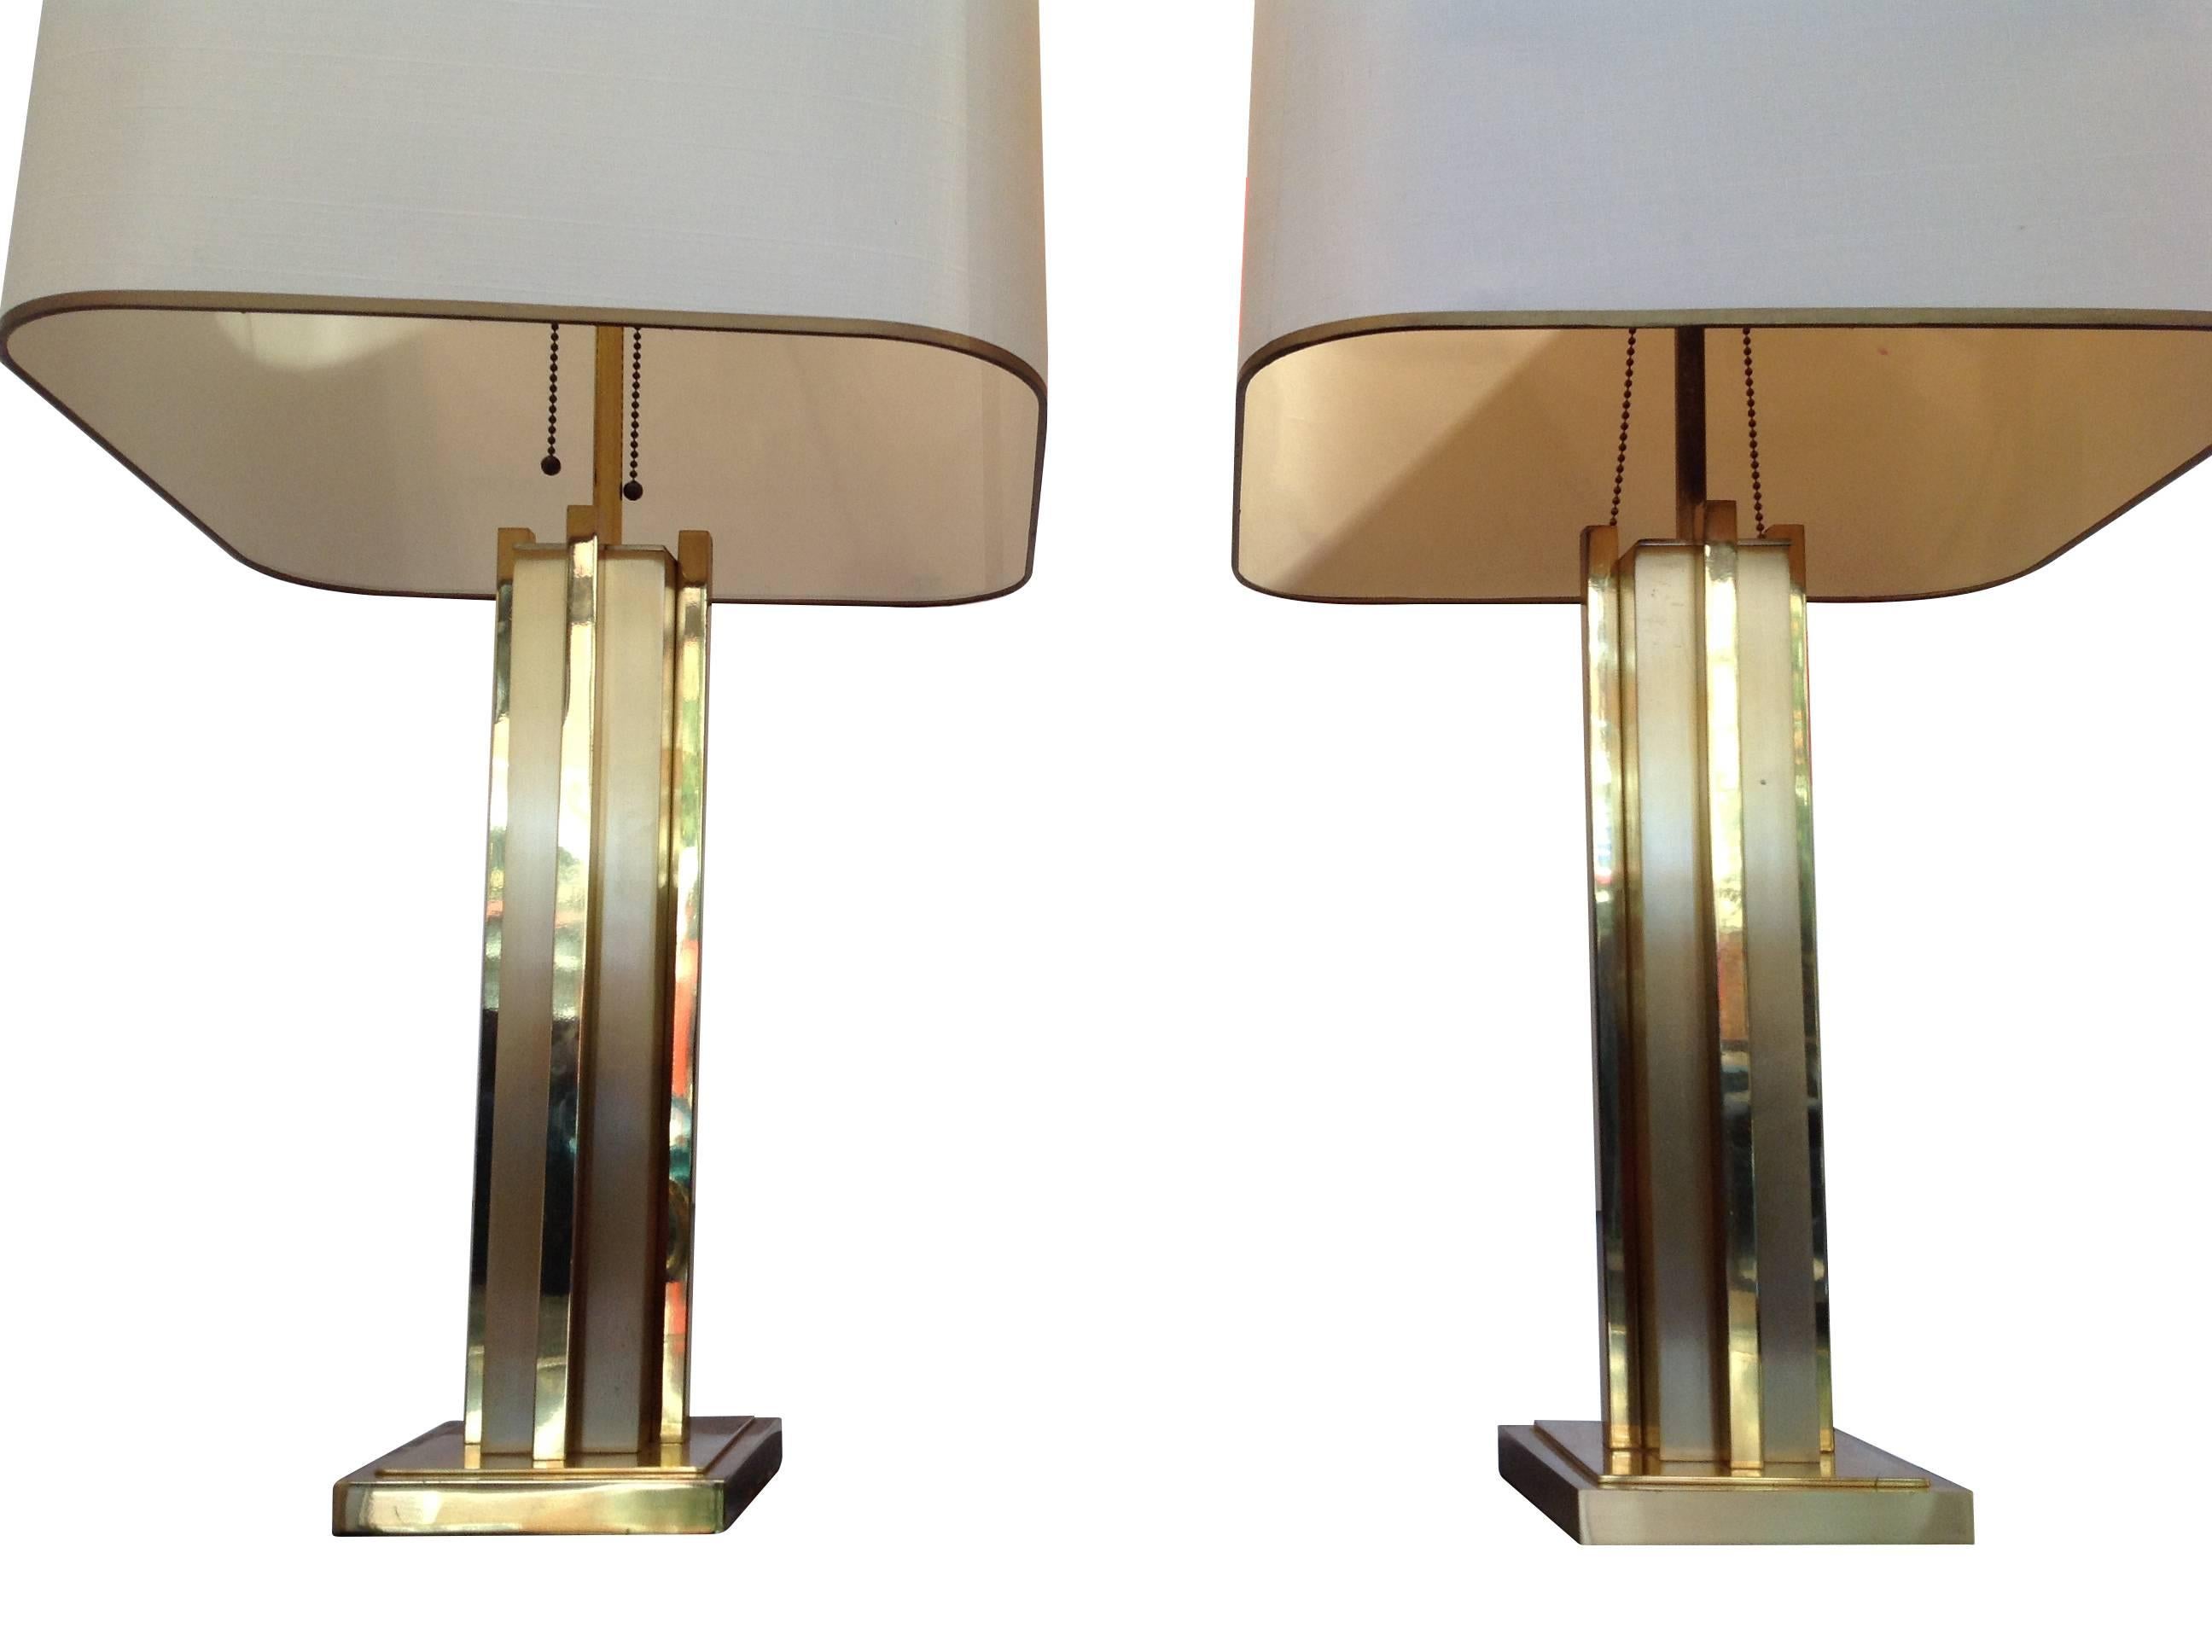 A large pair of Willy Rizzo lamps with polished and brushed brass finish on stem and base, with original cream shades with gold detailing on the rim. New bespoke black and gold shades can be made to order if required. Both re-wired with antique gold